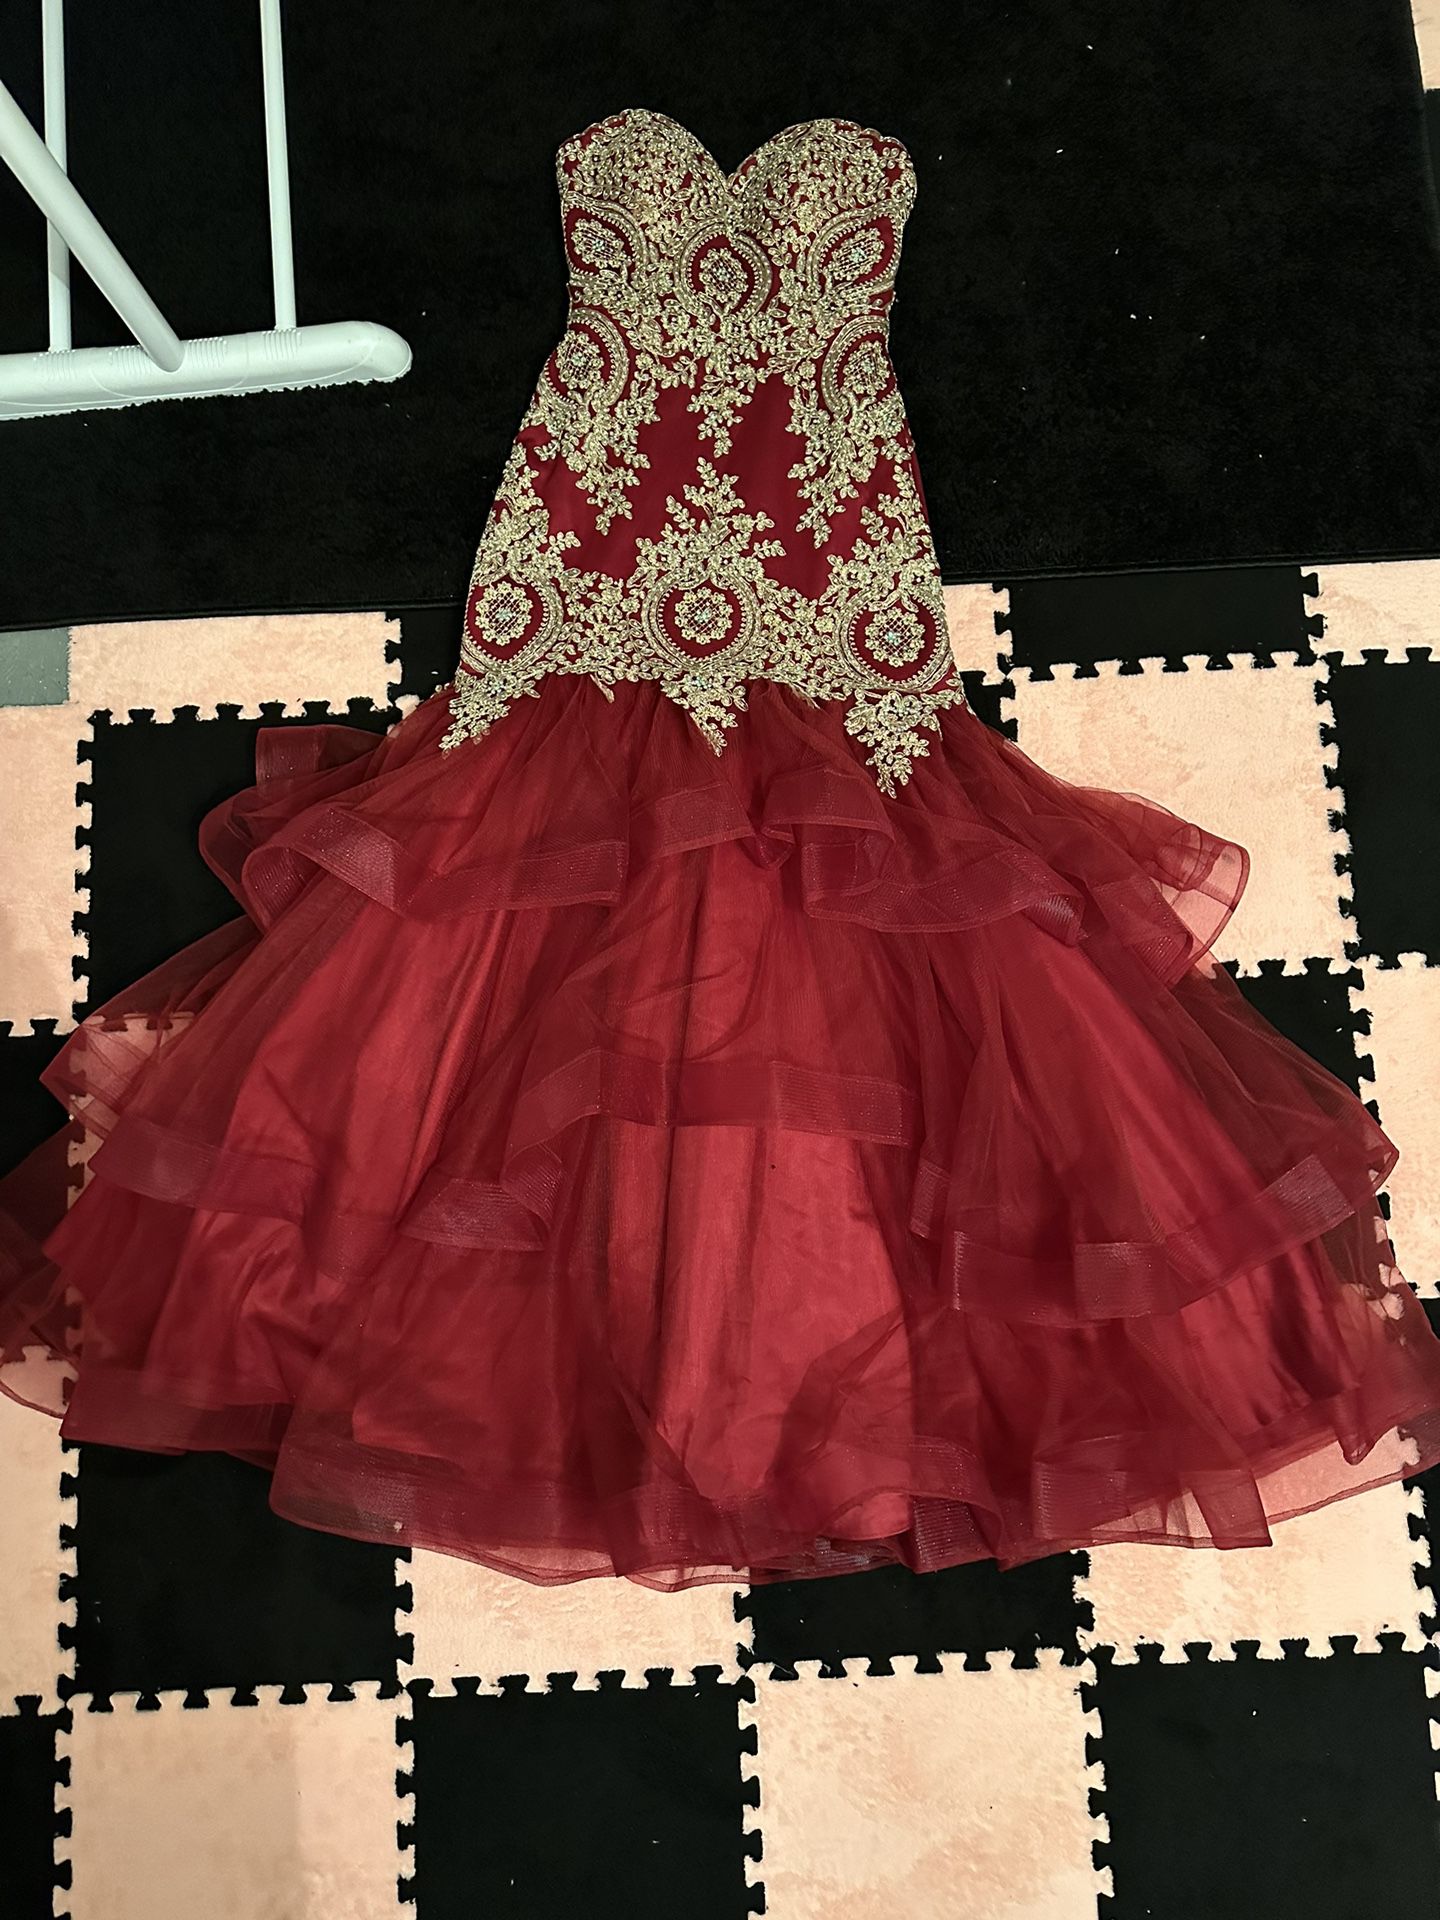 Red & Gold Prom Dress